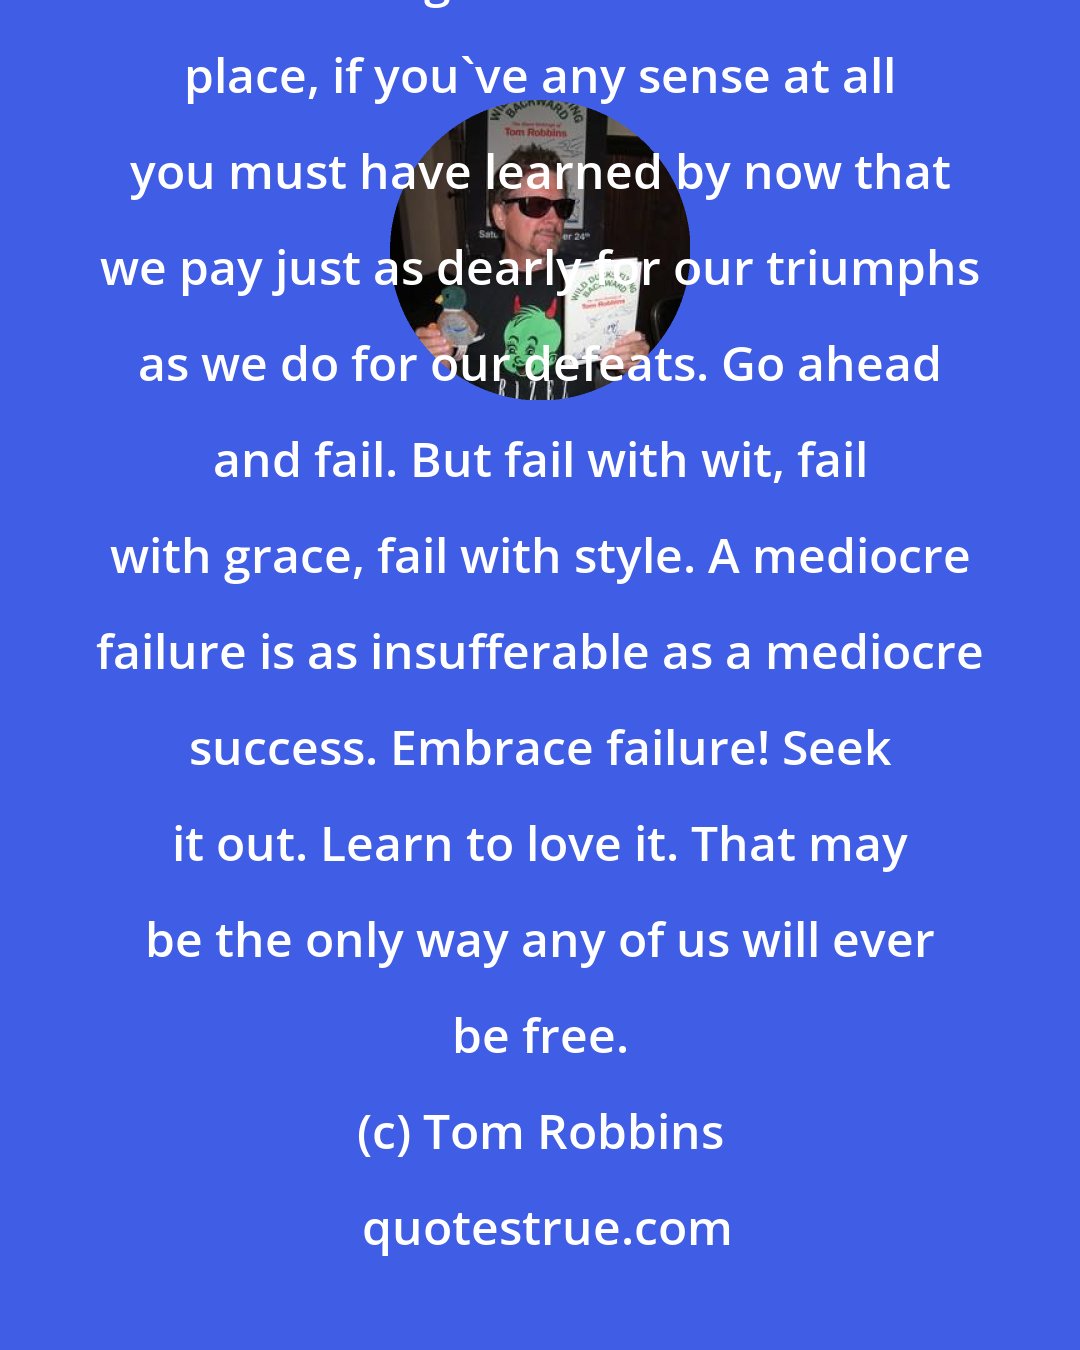 Tom Robbins: So you think that you're a failure, do you? Well, you probably are. What's wrong with that? In the first place, if you've any sense at all you must have learned by now that we pay just as dearly for our triumphs as we do for our defeats. Go ahead and fail. But fail with wit, fail with grace, fail with style. A mediocre failure is as insufferable as a mediocre success. Embrace failure! Seek it out. Learn to love it. That may be the only way any of us will ever be free.